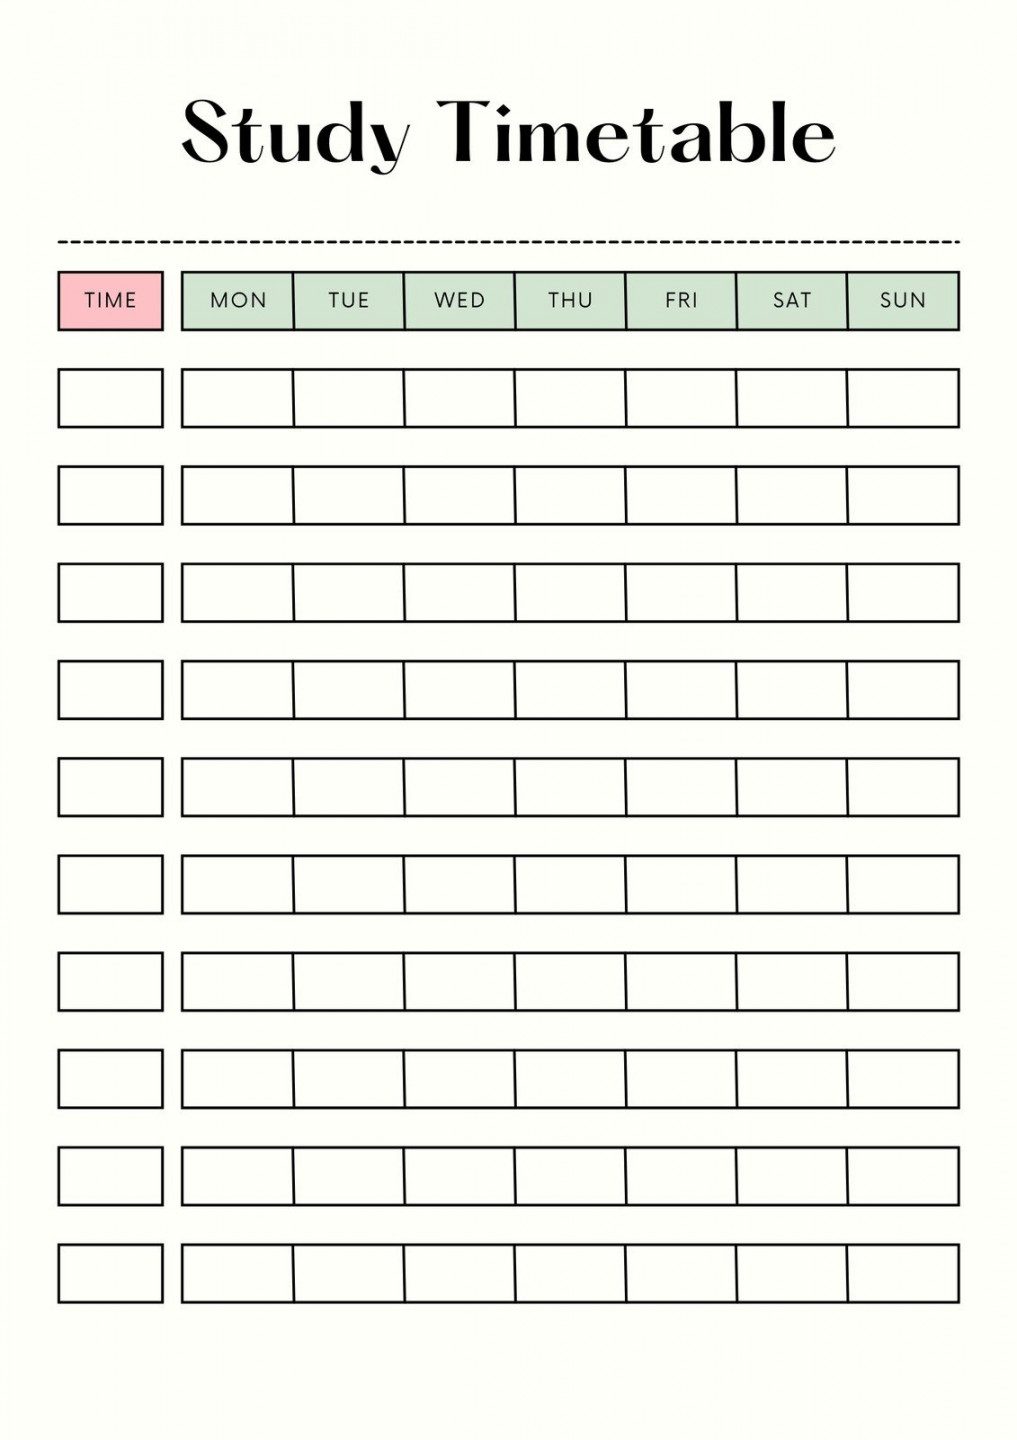 Free and customizable timetable templates